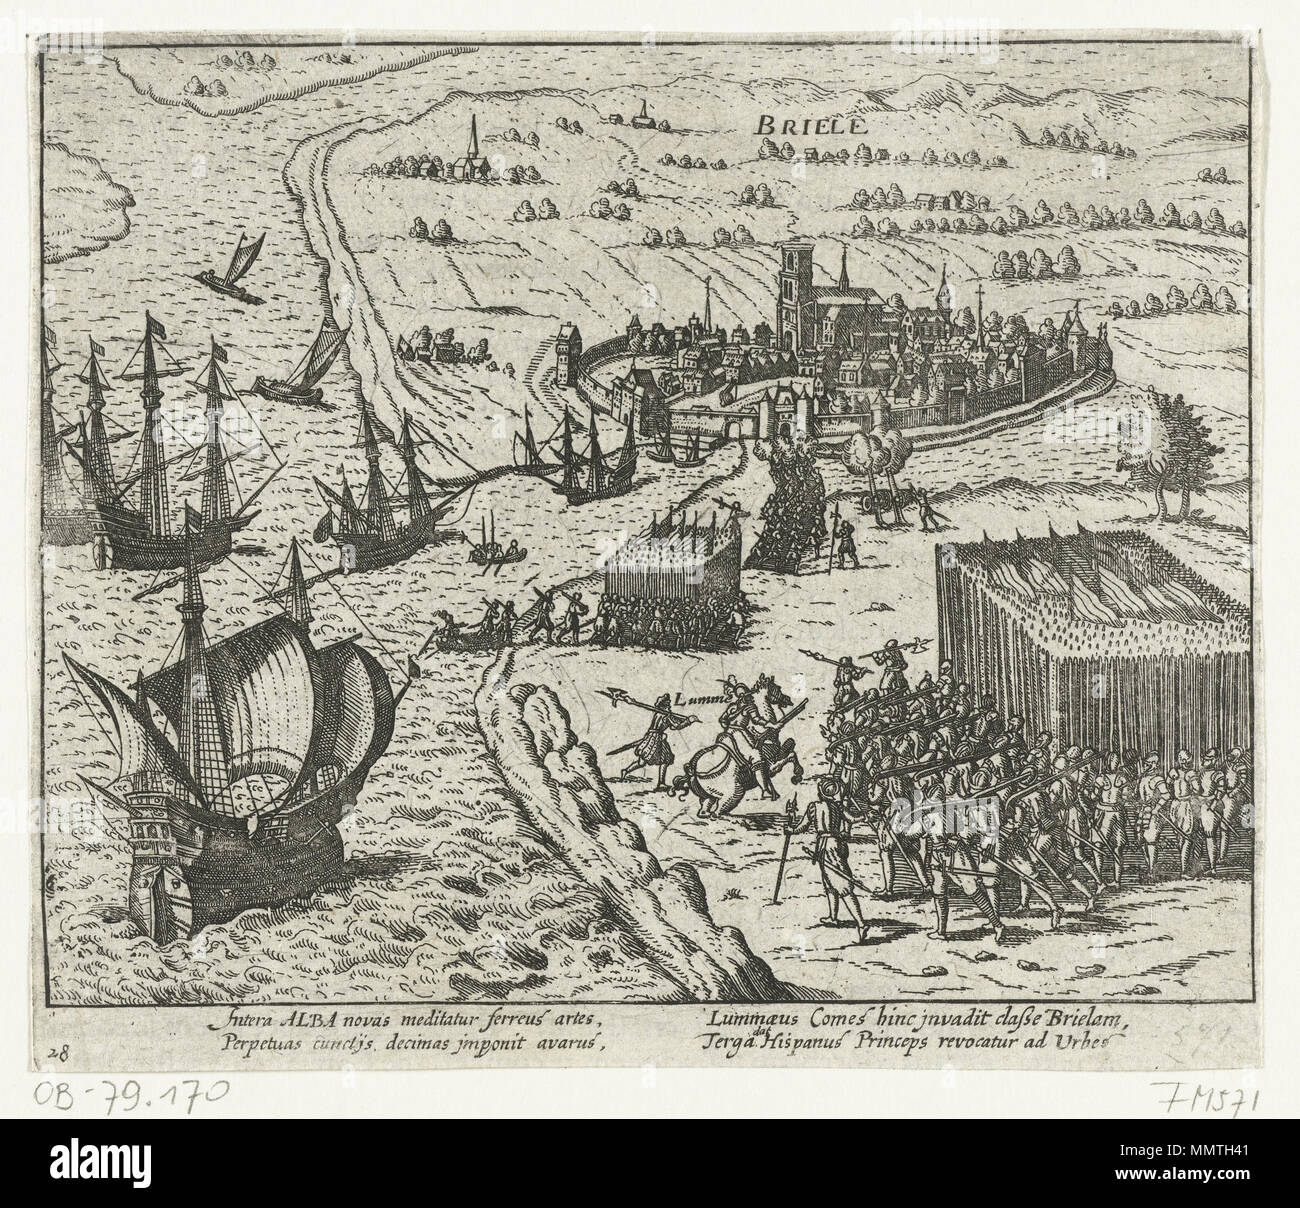 Depiction of the capture of Den Briel (present day Brielle) near Rotterdam  by the Watergeuzen (protestant rebels) commanded by Lumey and Blois van  Treslong, 1 April 1572. Lumey mentioned as Lumme.